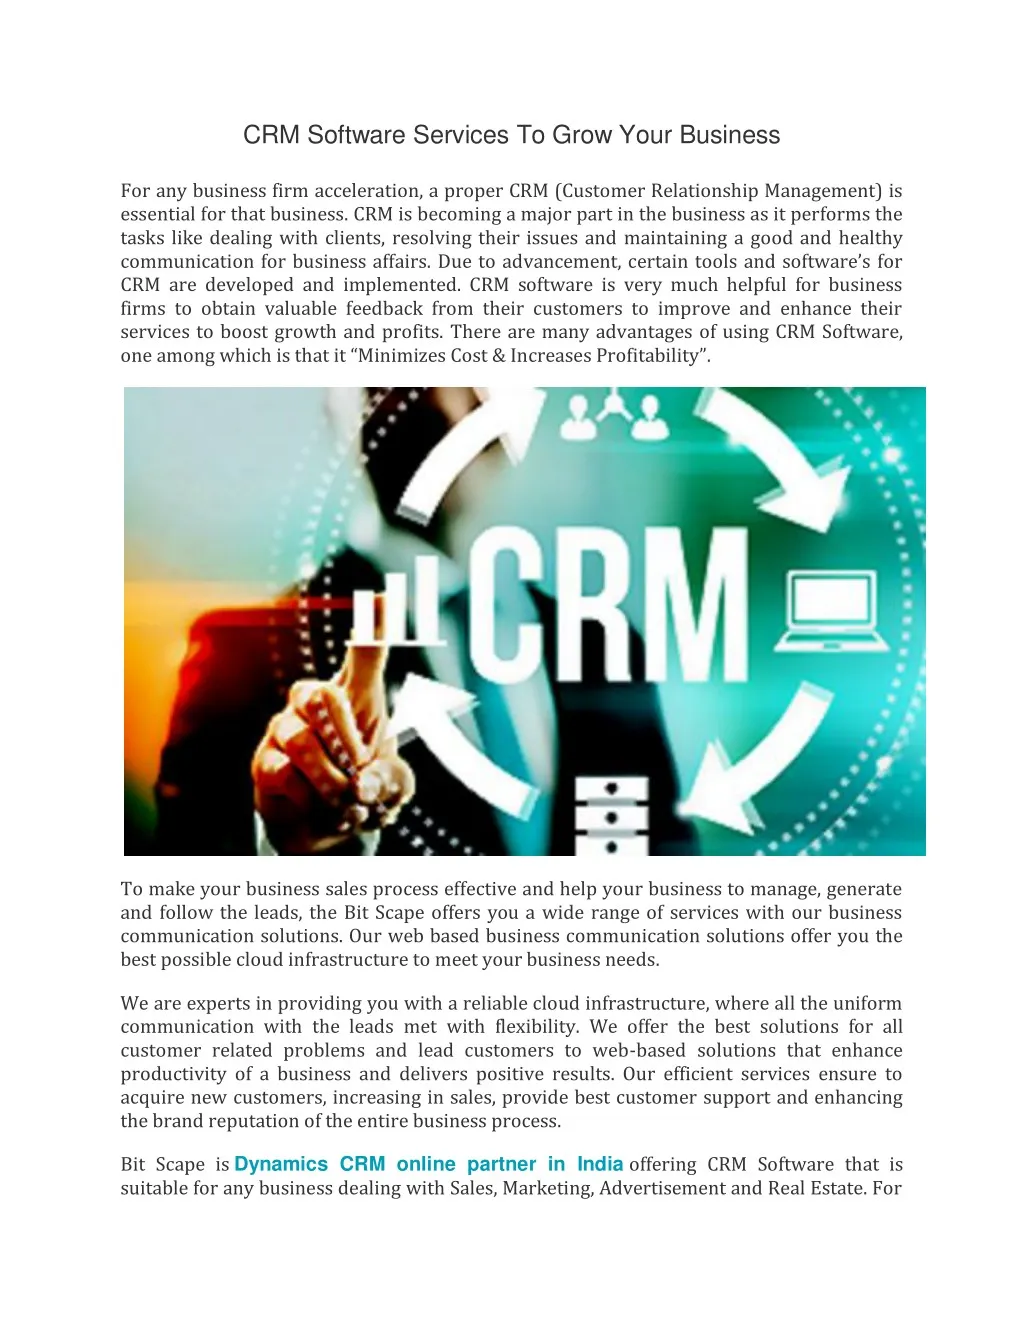 crm software services to grow your business